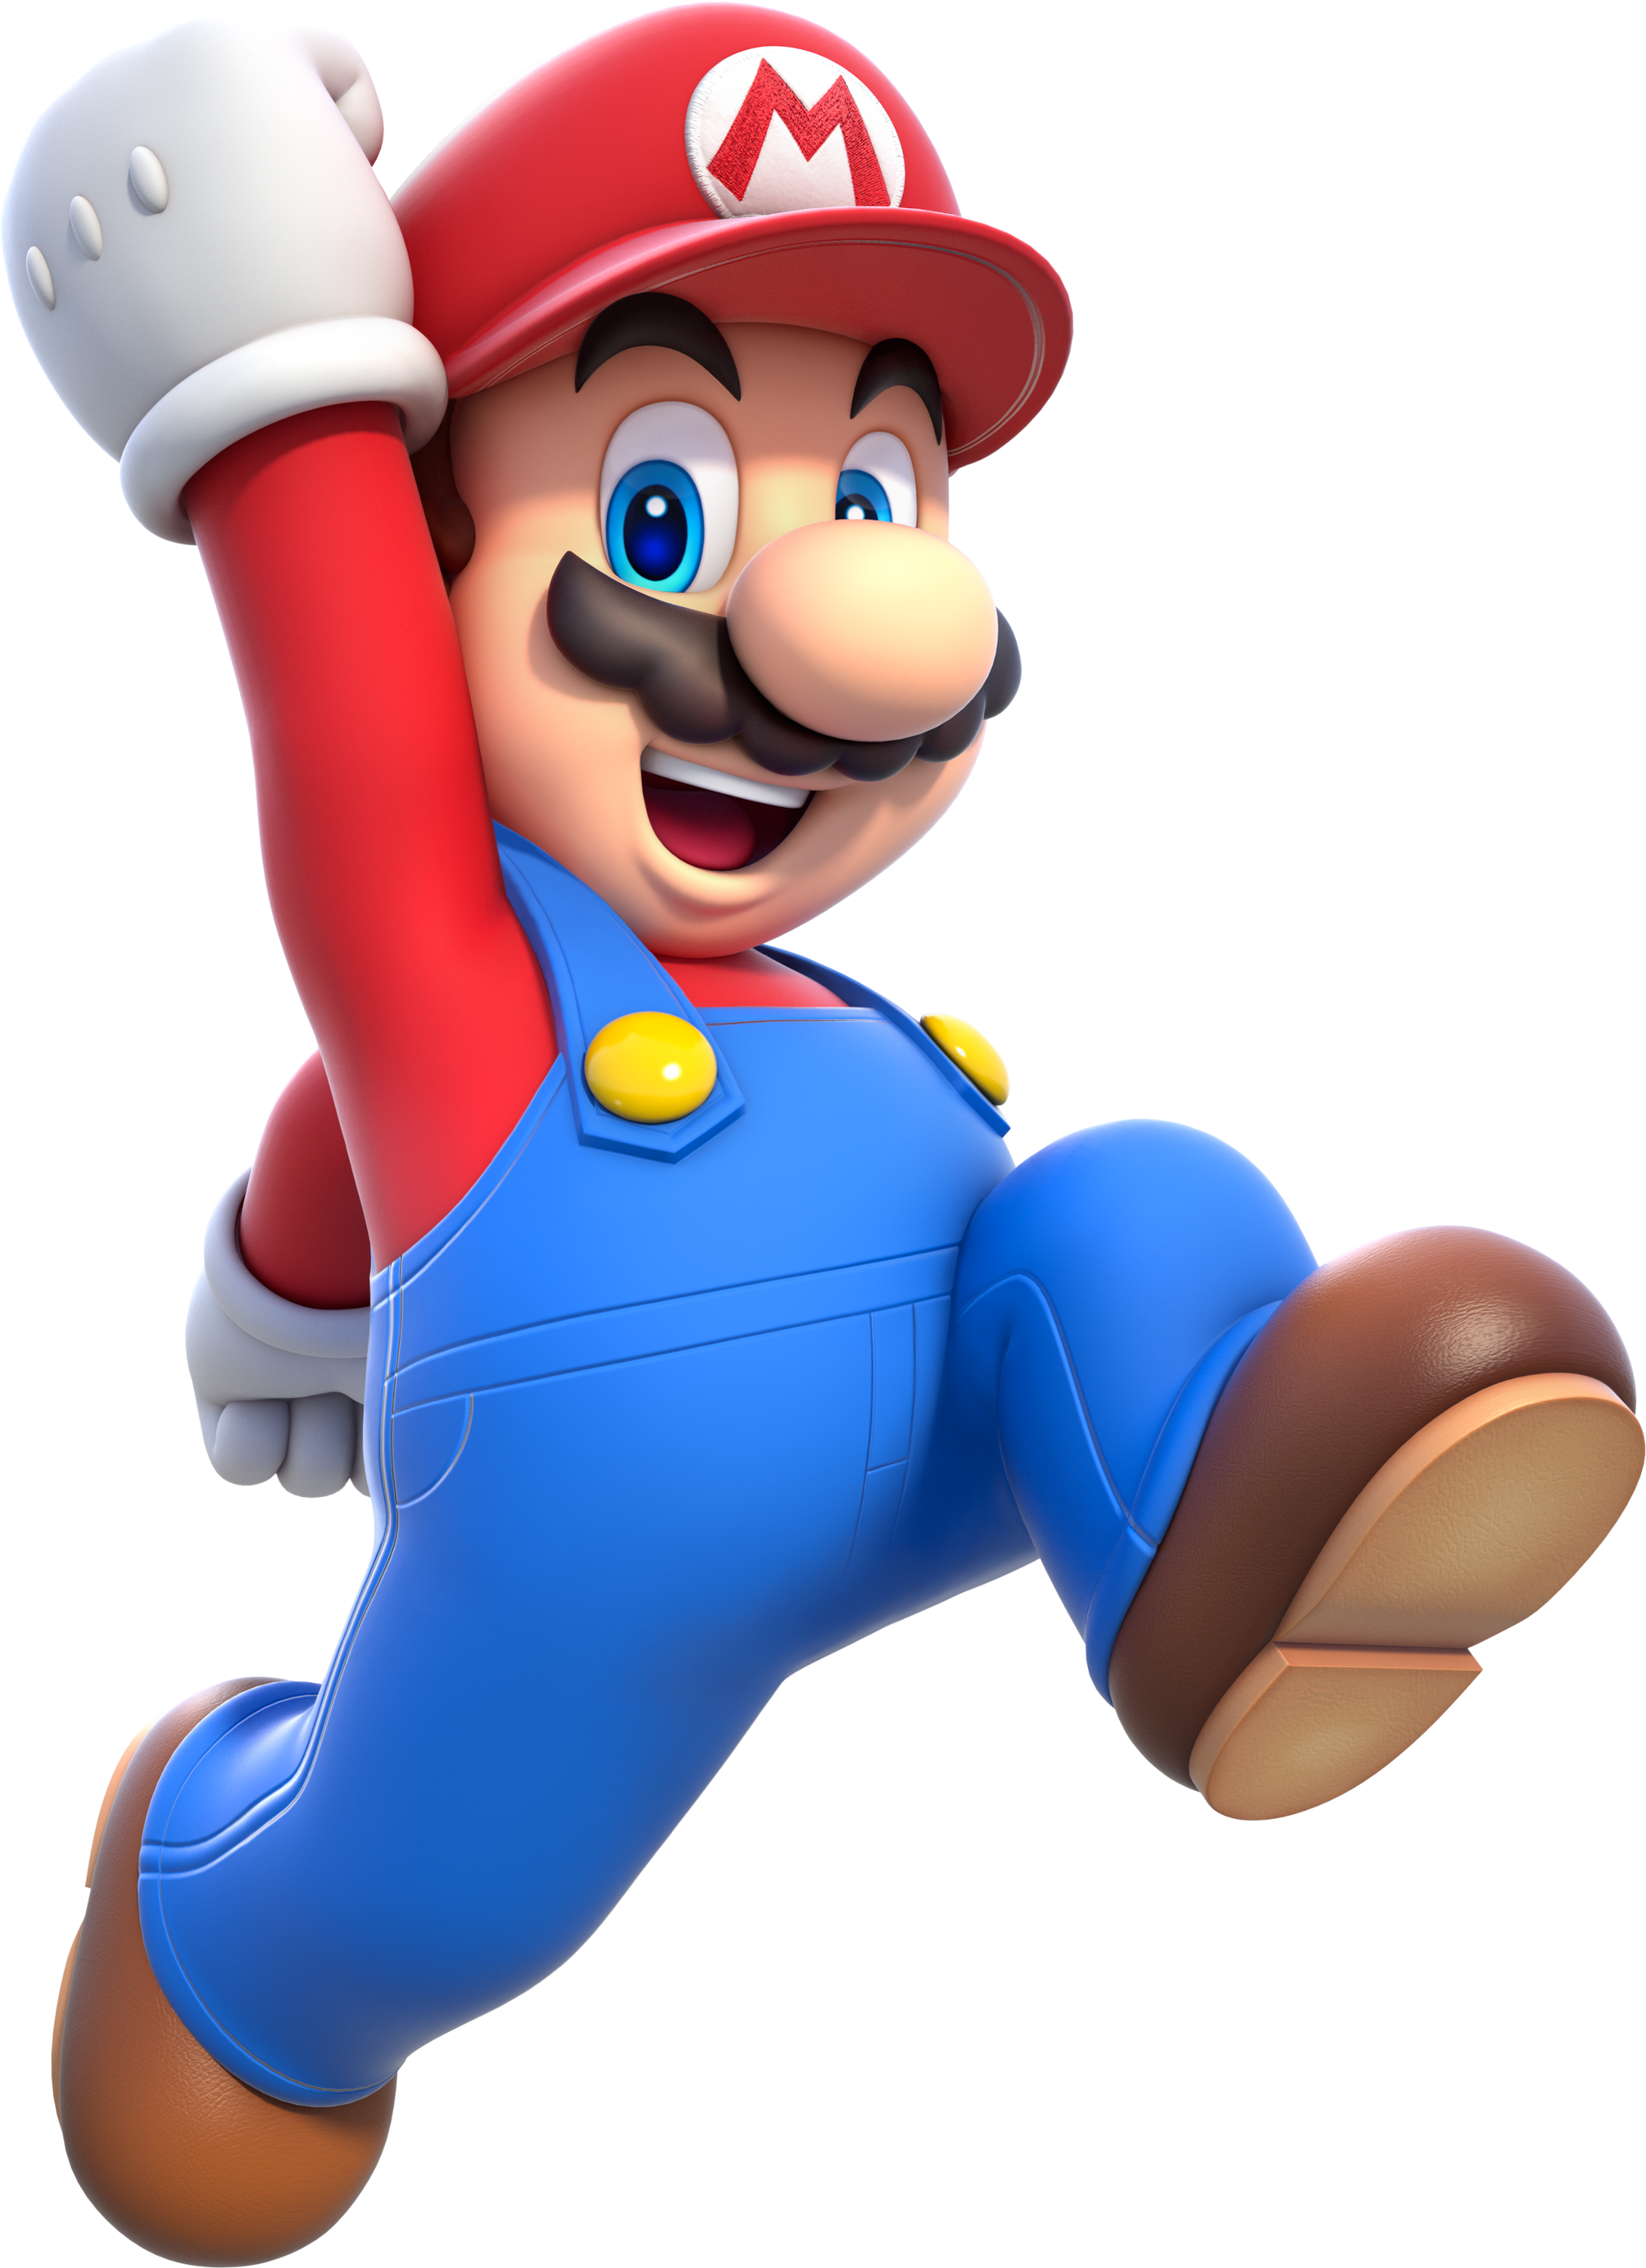 Fun facts about Super Mario GameHouse